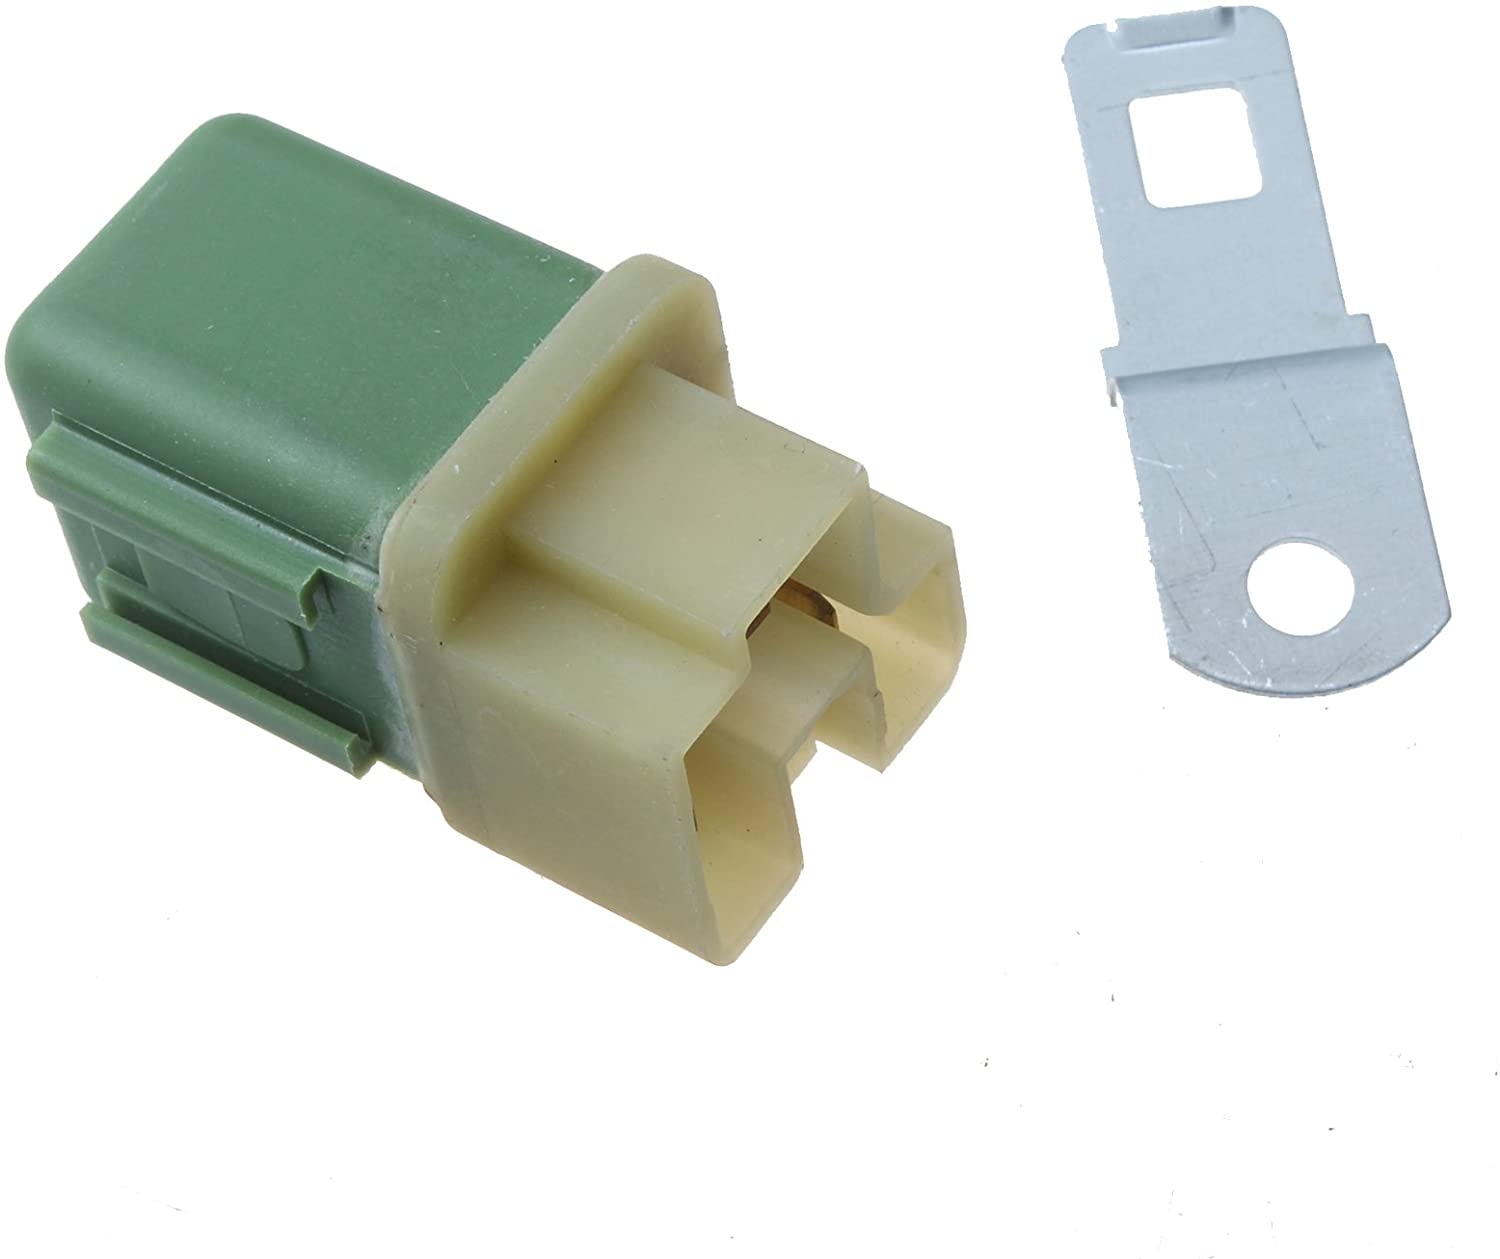 Relay AT154924 4251588 for John Deere Excavator 110 120 160LC 190 230LC 230LCR 270LC 330LCR 450LC 490E 550LC 690ELC 790ELC 80 892 992ELC - KUDUPARTS